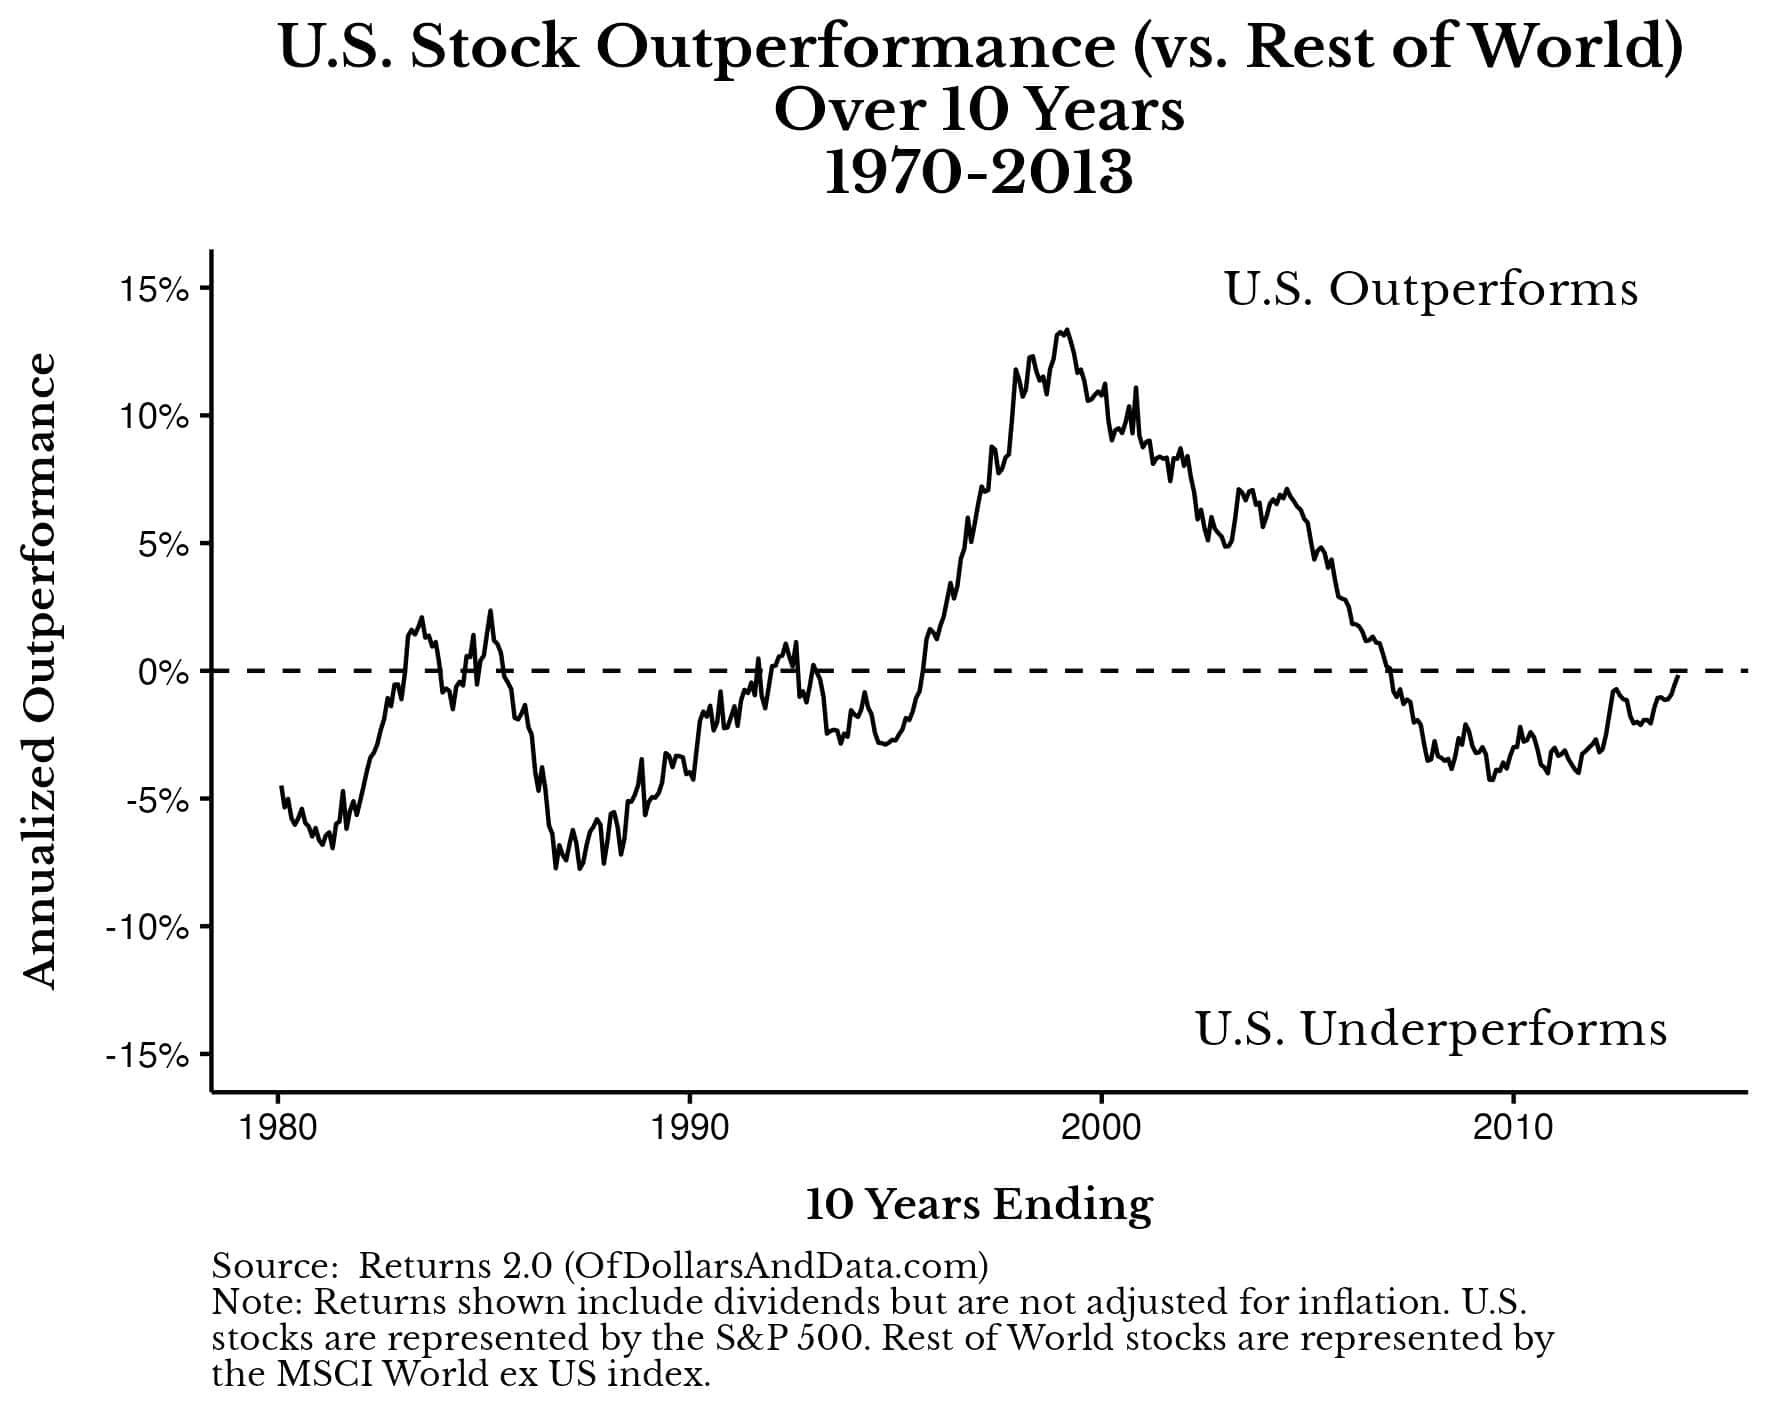 U.S. stocks vs. Rest of World stocks rolling 10-year annualized outperformance from 1970-2013.